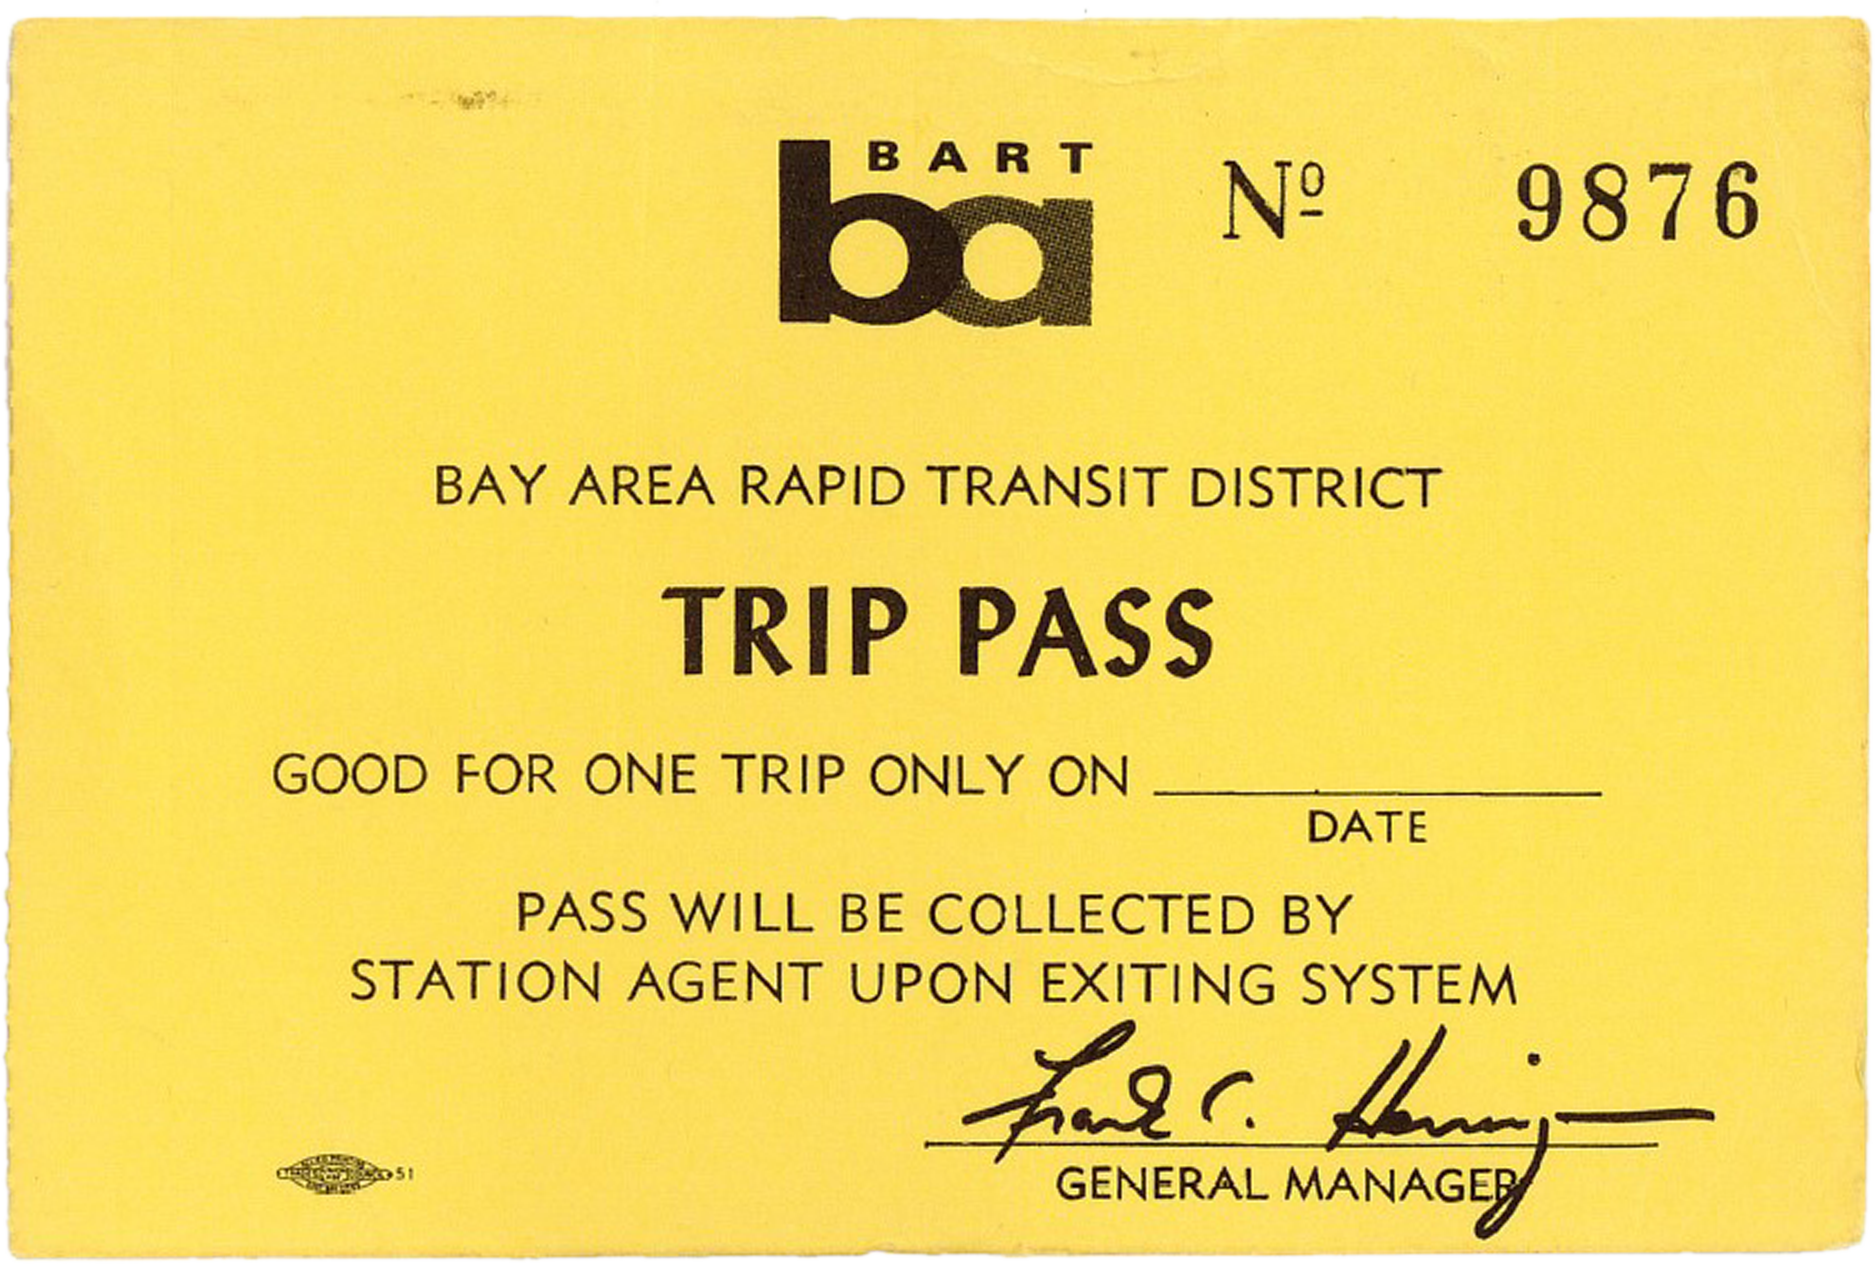 BART tickets through the years